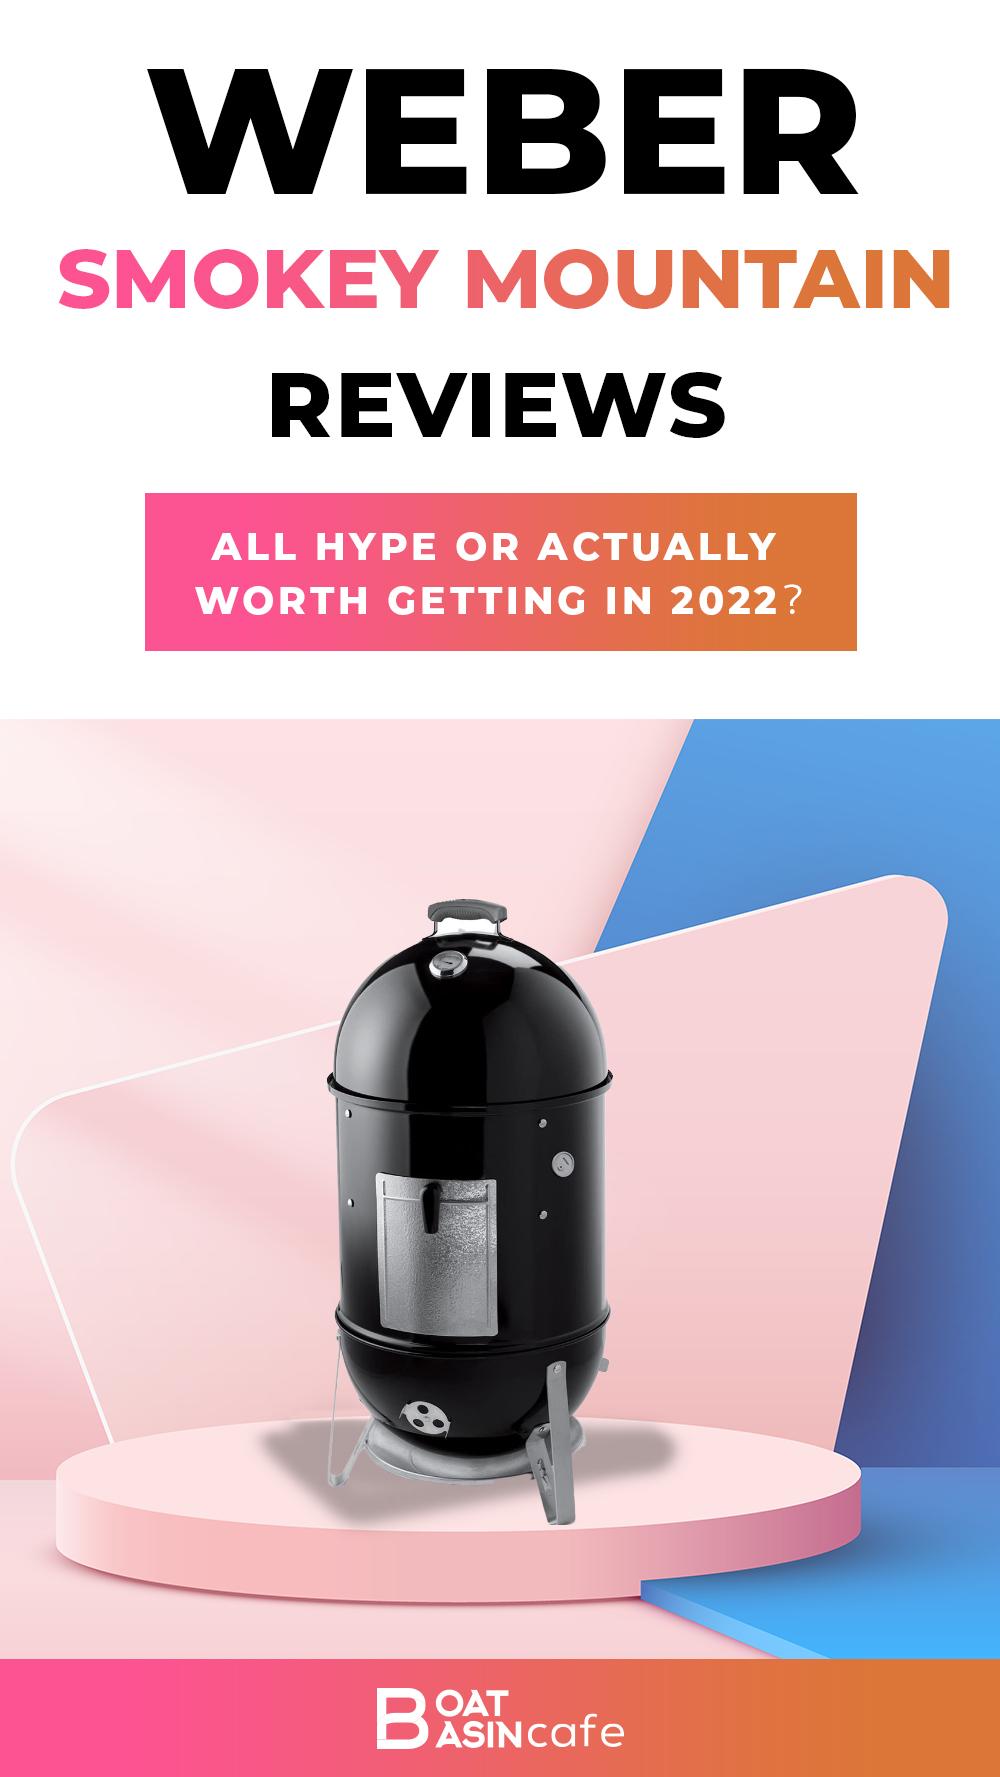 Weber Smokey Mountain Review: All Hype or Actually Worth Getting in 2022?